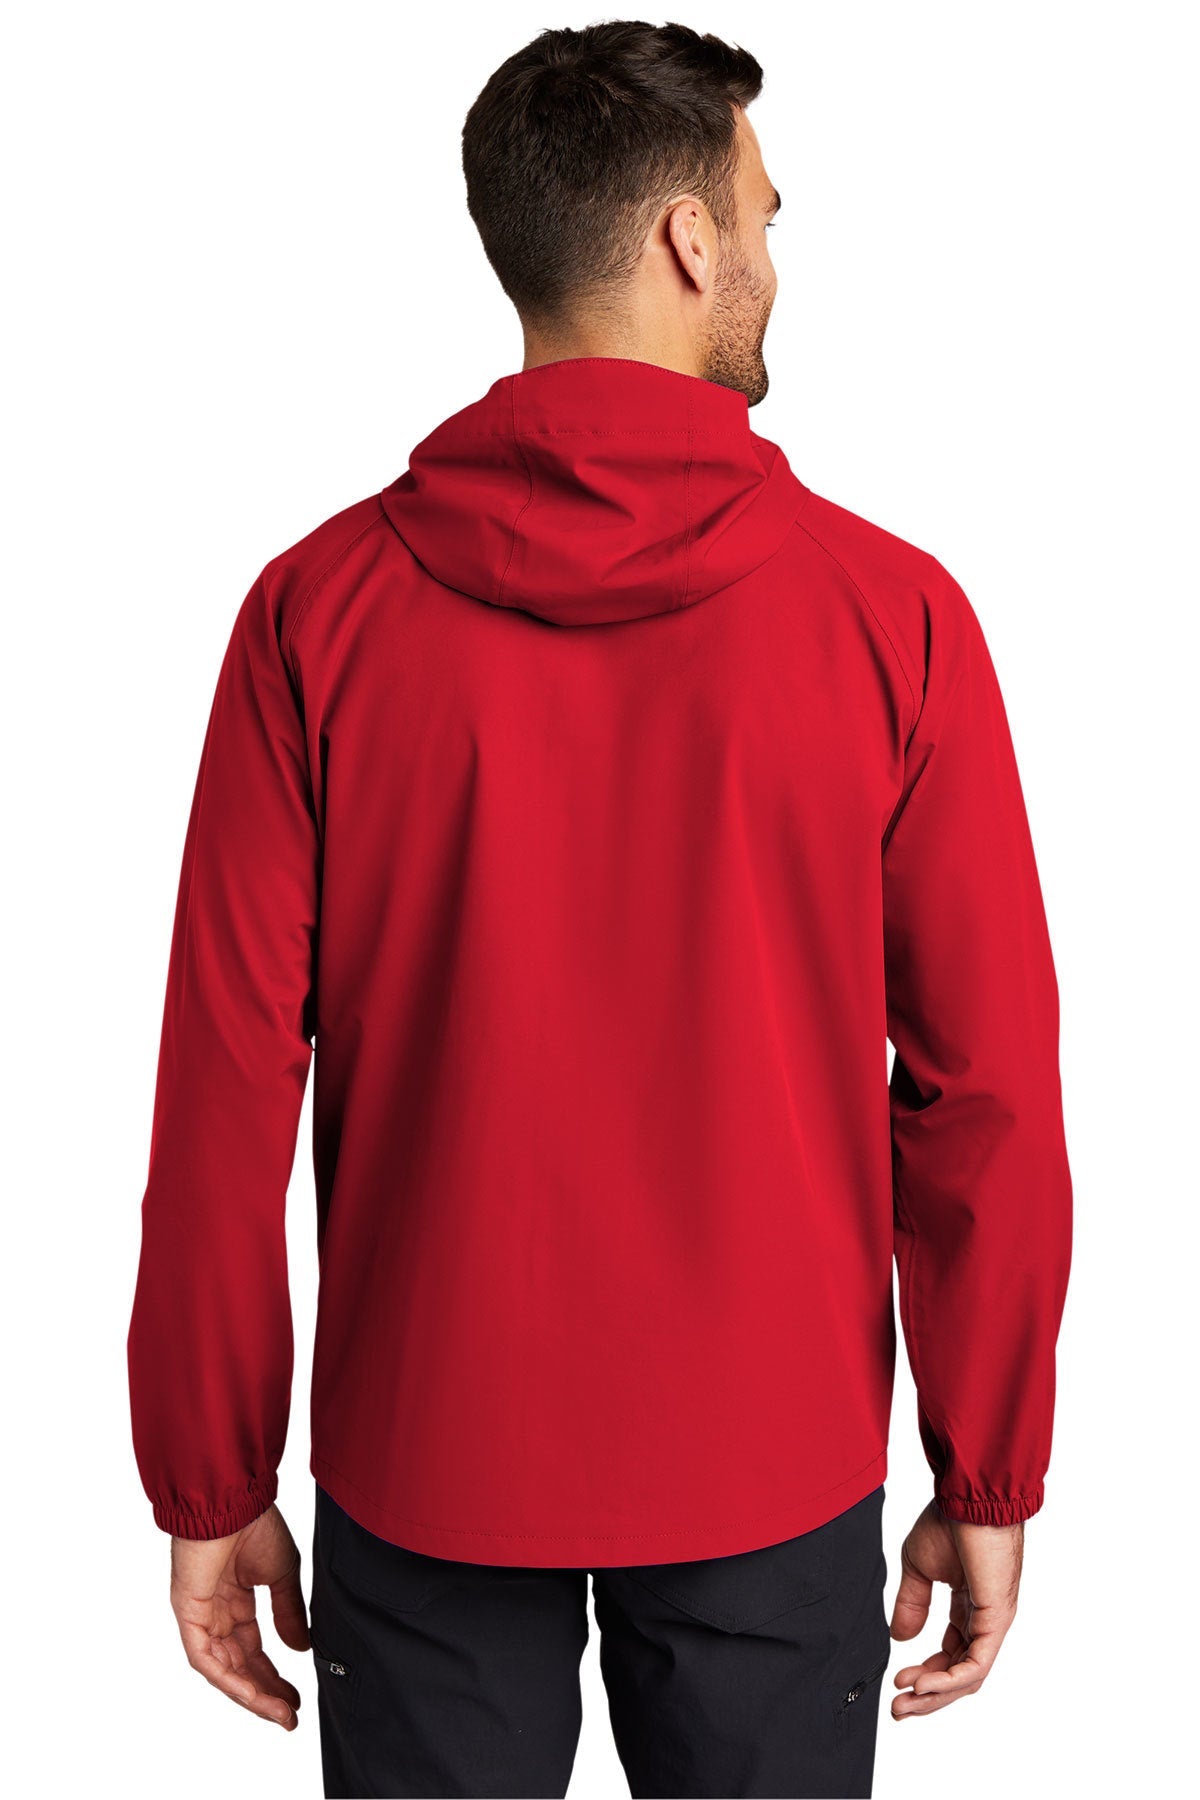 Port Authority Essential Branded Rain Jackets, Deep Red